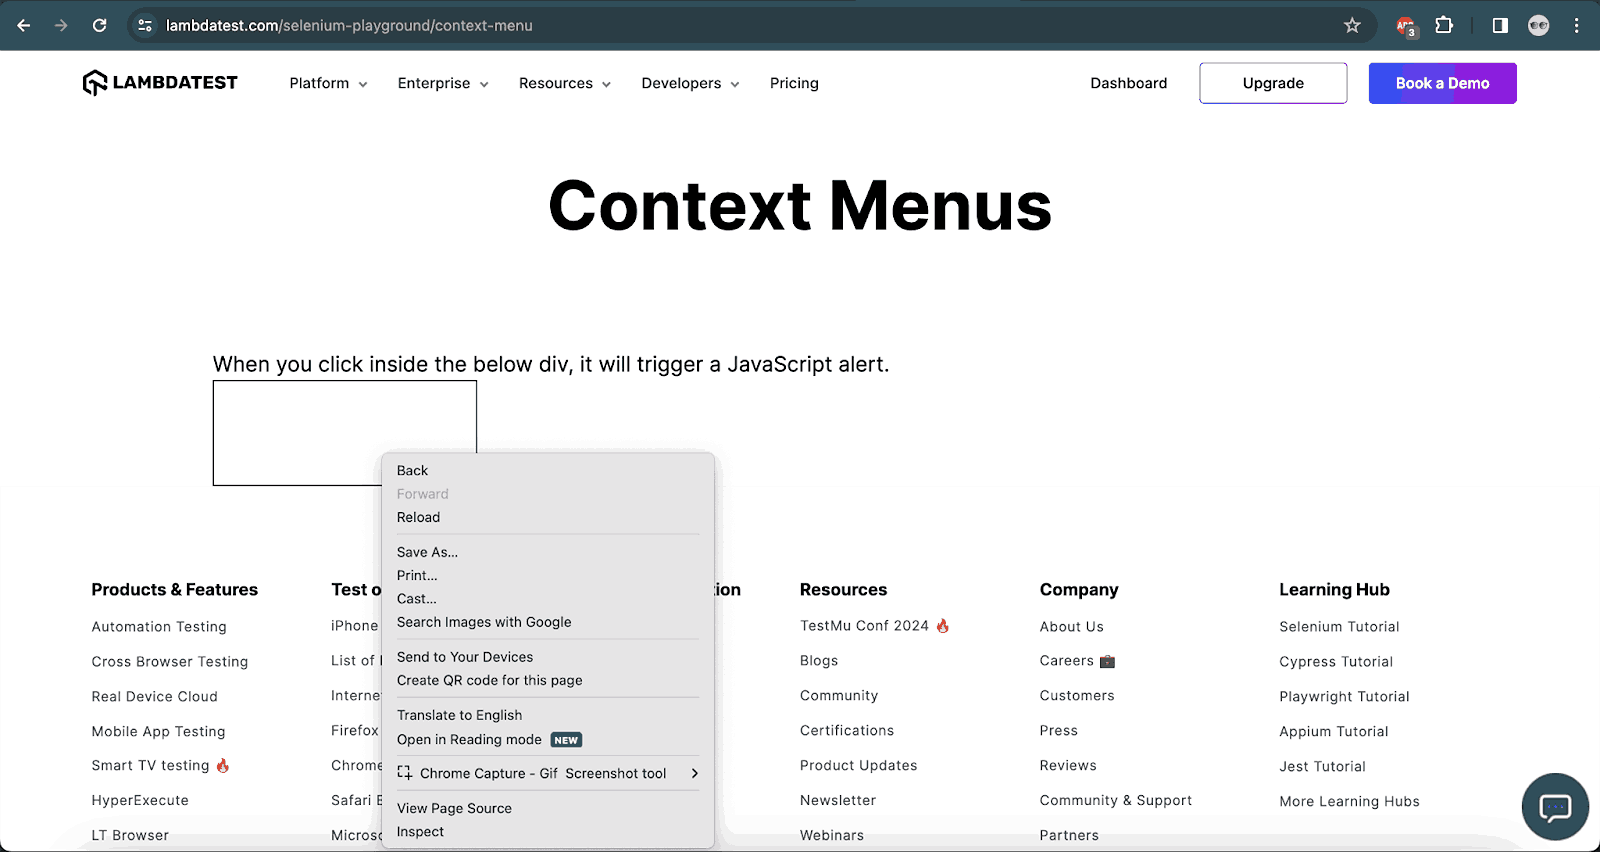 Navigate to the Context Menus page